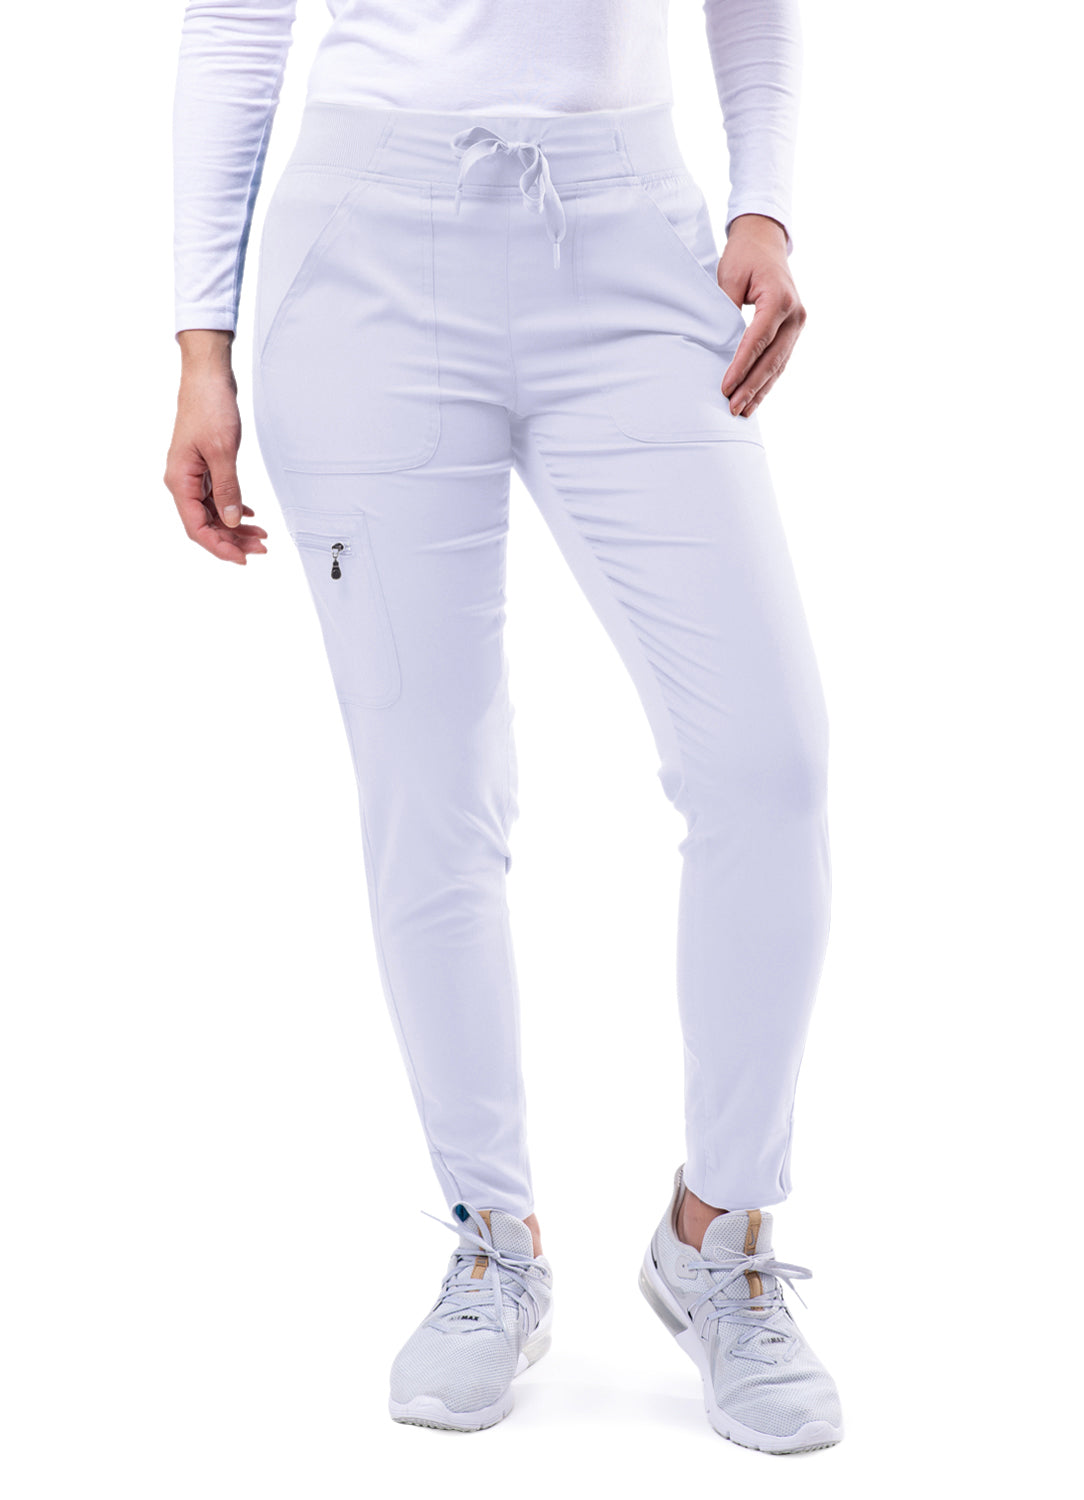 Ultimate Yoga Jogger Pant - All Colors